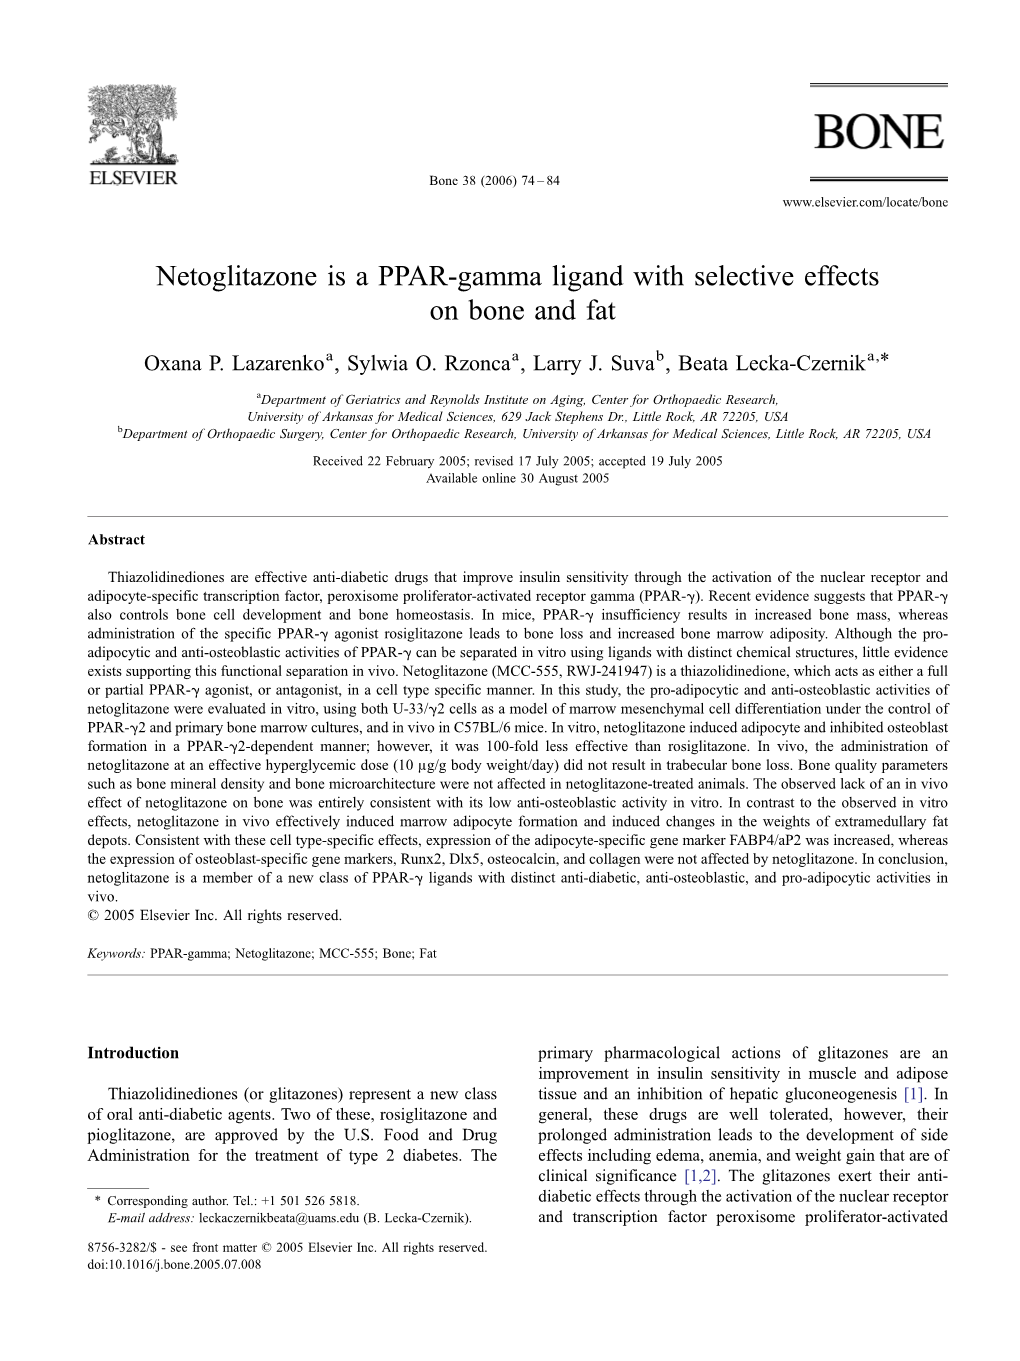 Netoglitazone Is a PPAR-Gamma Ligand with Selective Effects on Bone and Fat ⁎ Oxana P